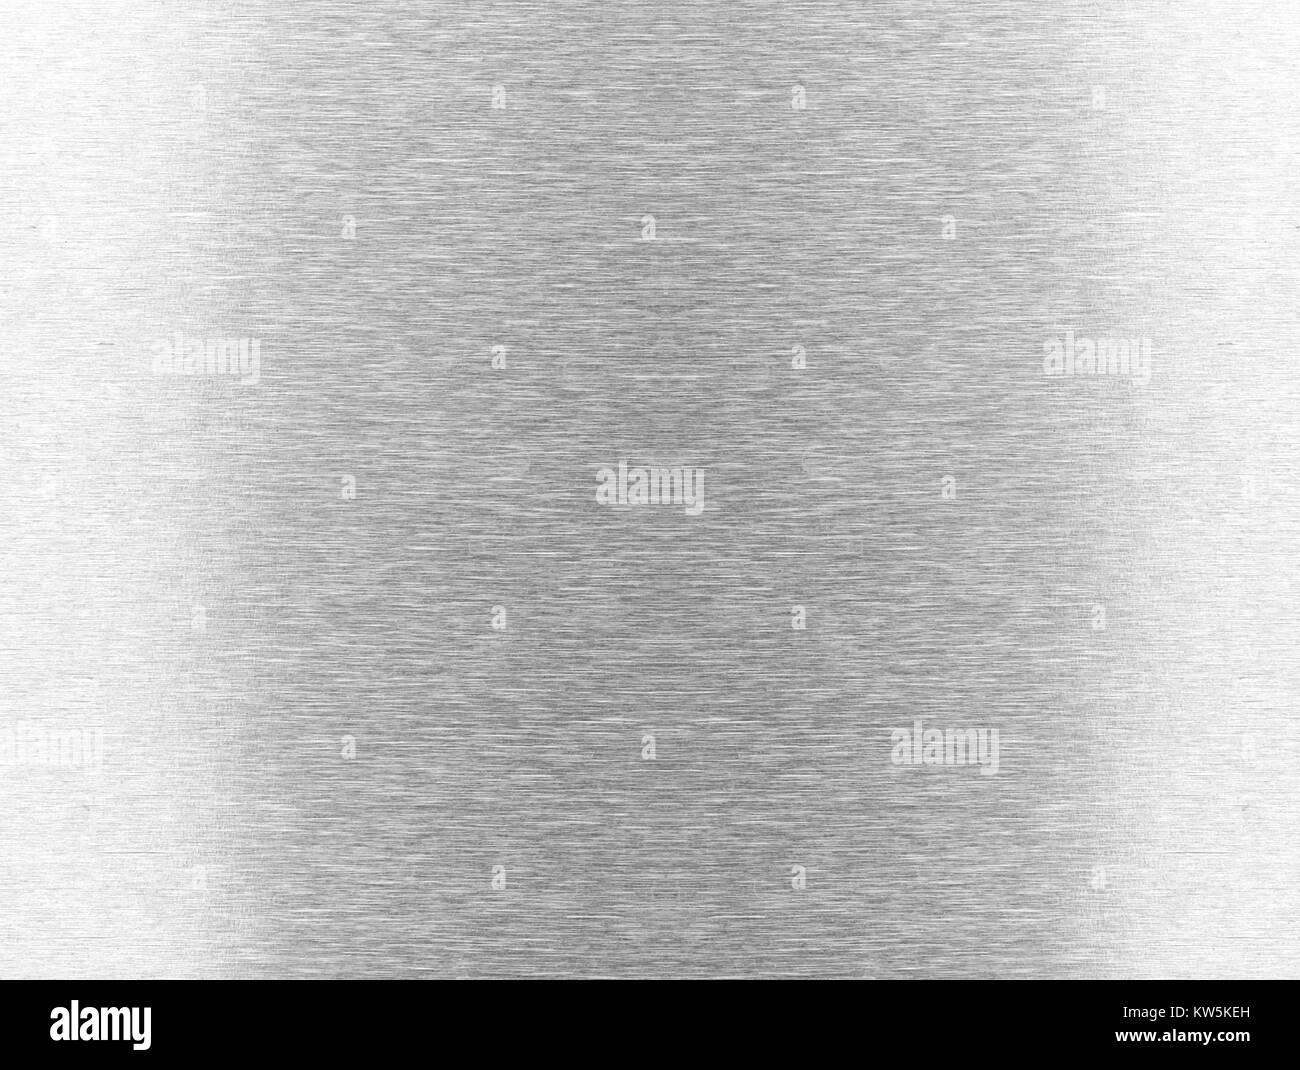 https://c8.alamy.com/comp/KW5KEH/metal-texture-background-aluminum-brushed-silver-stainless-KW5KEH.jpg